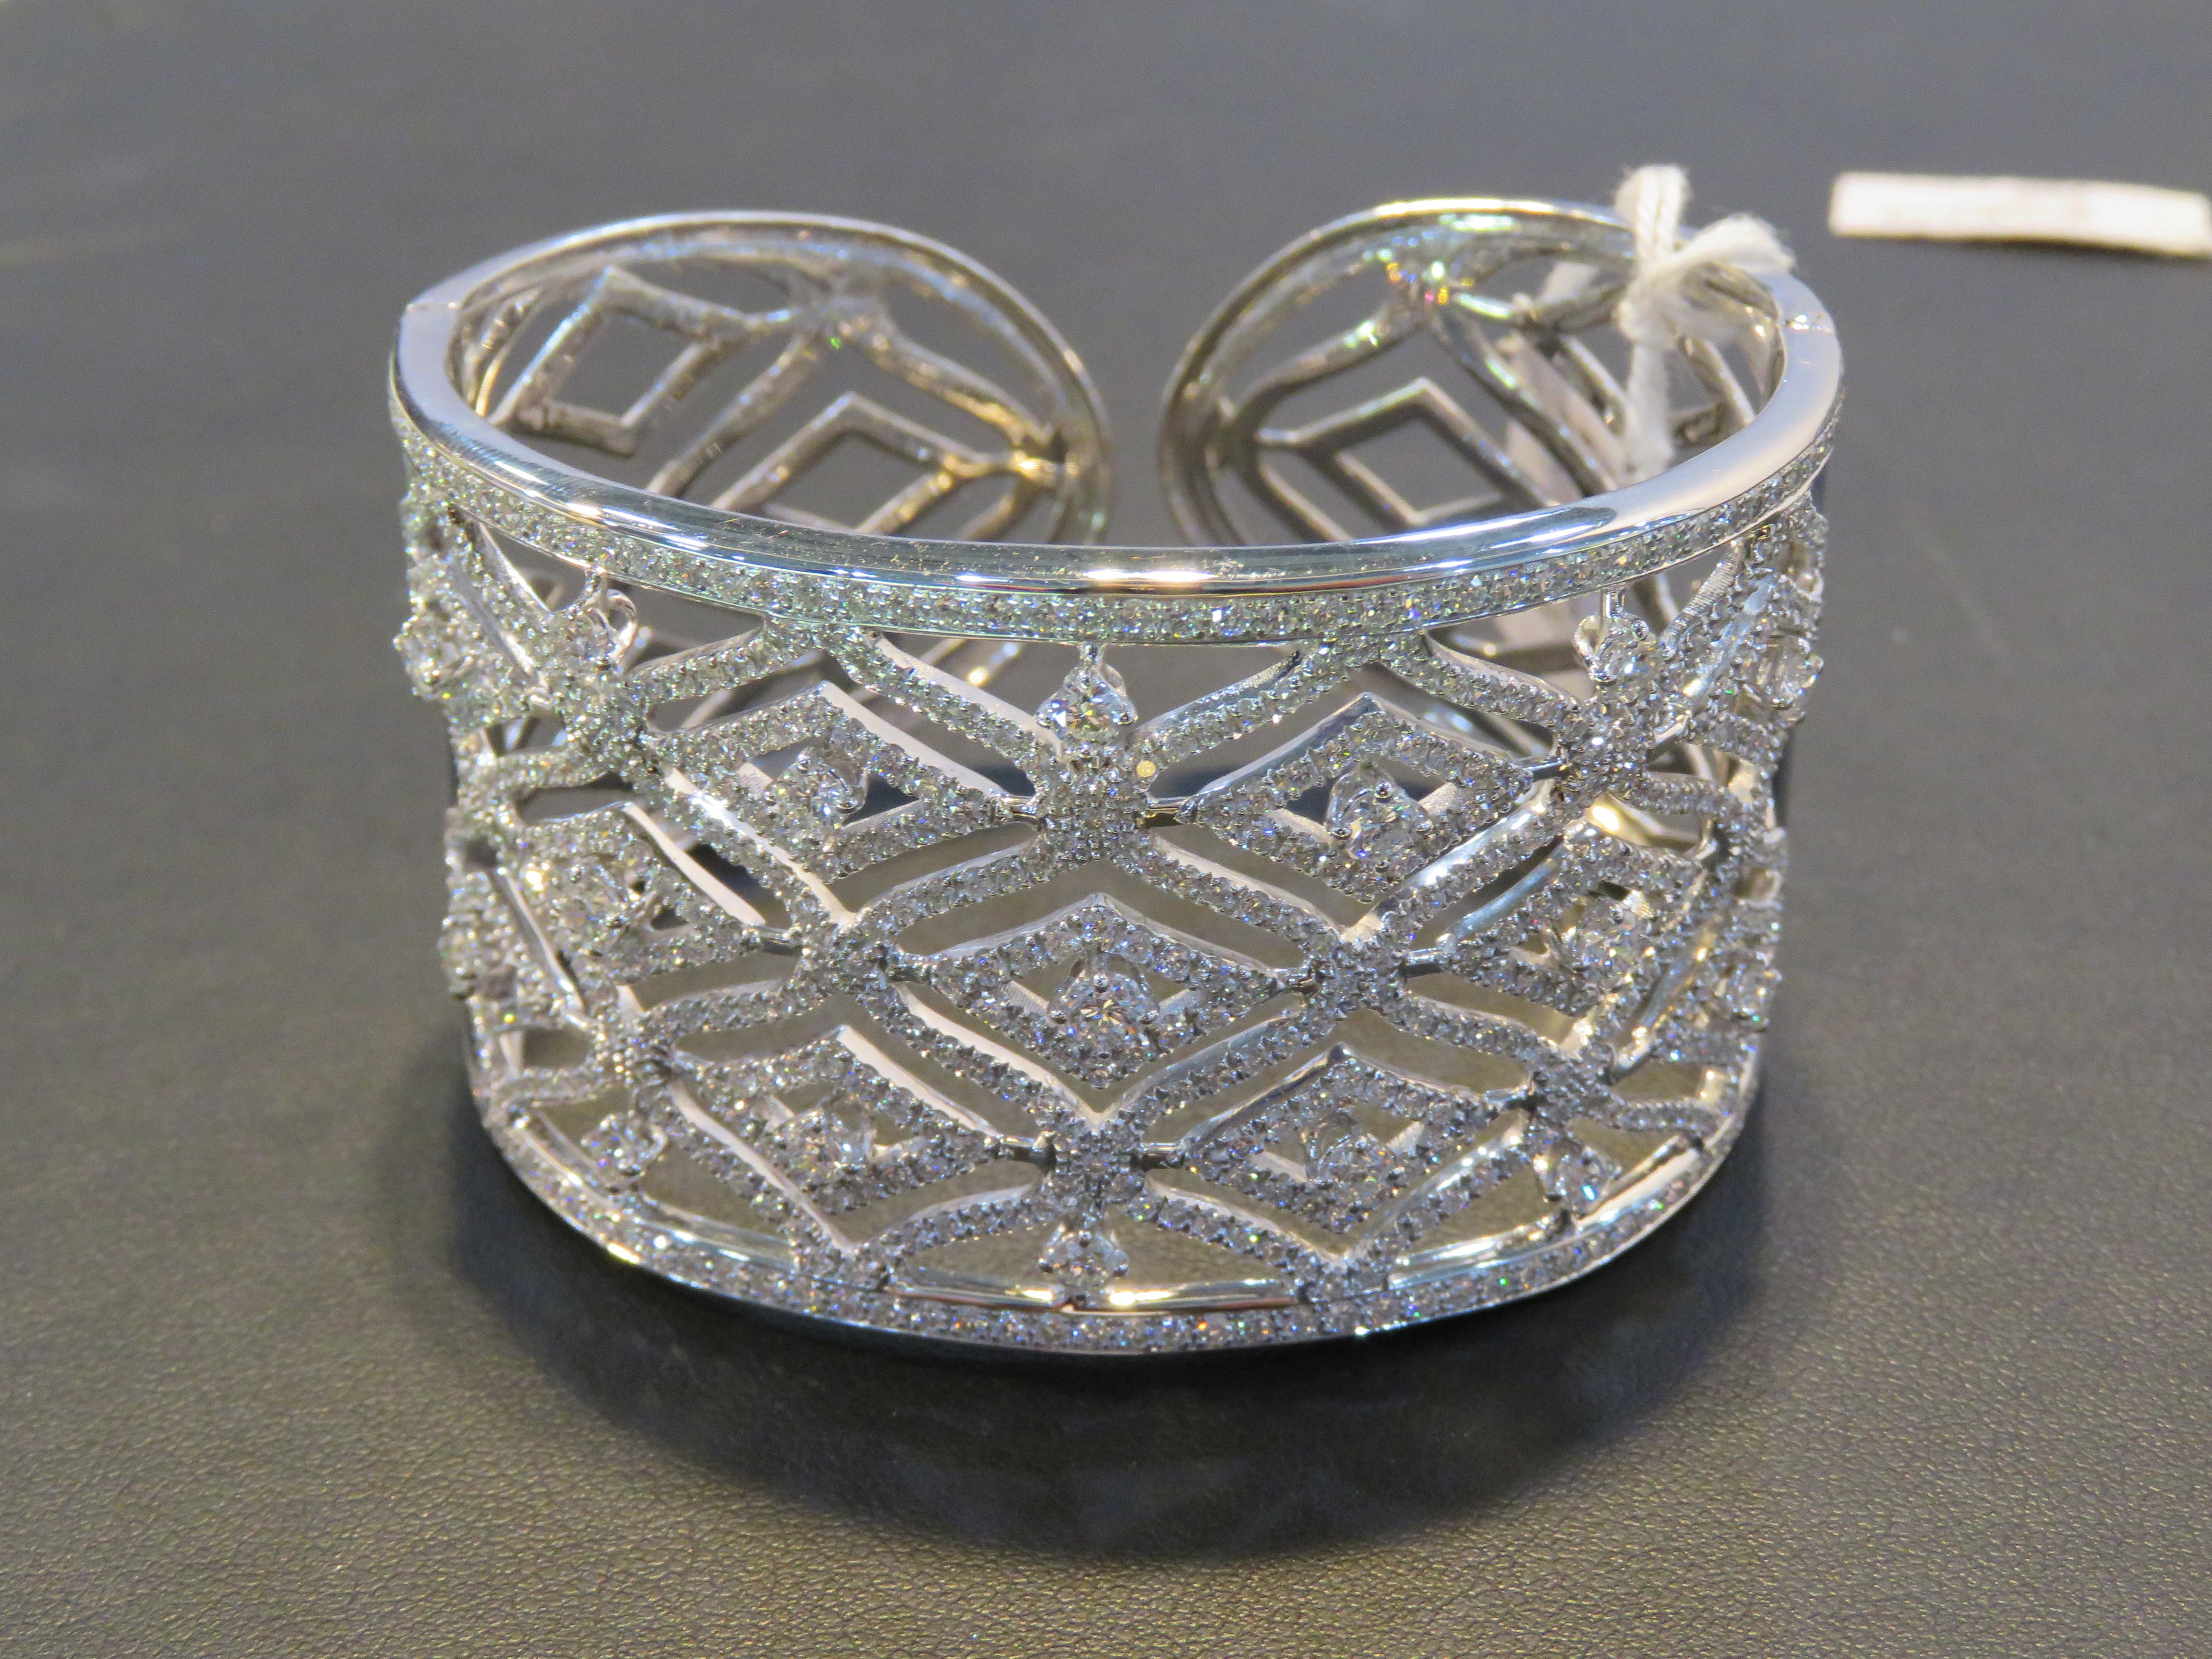 The Following Item we are offering is a Rare Magnificent Radiant 18KT White Gold Large Rare Gorgeous Fancy Diamond Wide Bangle Bracelet. Bracelet is comprised of Beautiful Gorgeous Glittering Diamonds!!! T.C.W. Approx 7CTS!!! This Gorgeous Bangle is